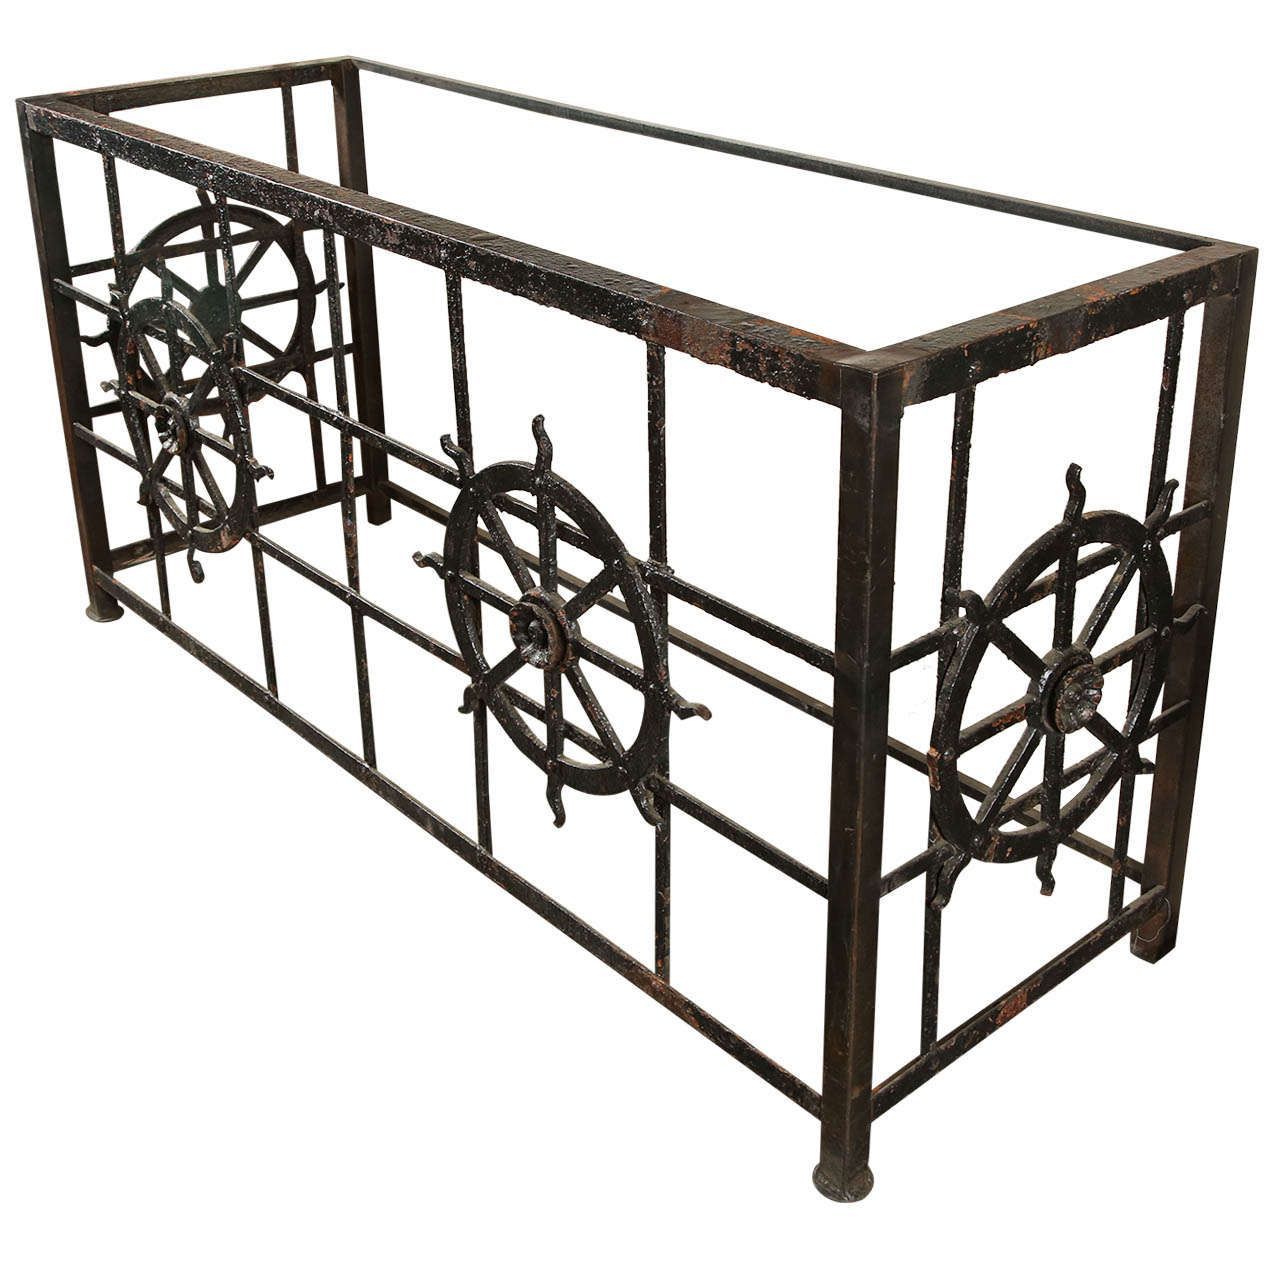 Cast Iron Side Table Made From Old Balcony In 2021 Regarding Oval Aged Black Iron Console Tables (View 5 of 20)